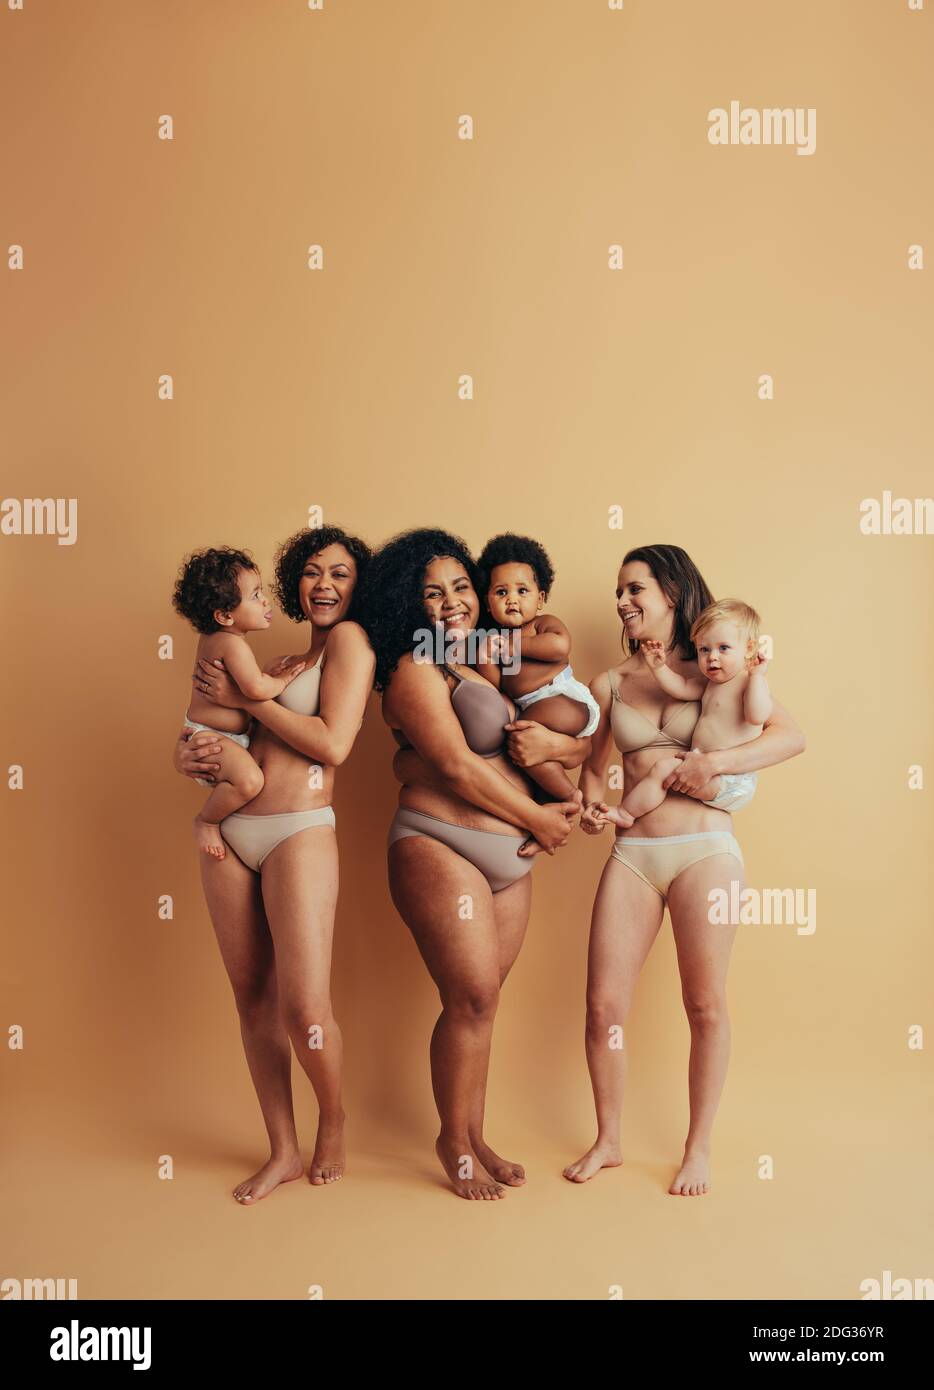 Women holding her babies. Strong and positive women. Mothers embracing their bodies. Stock Photo